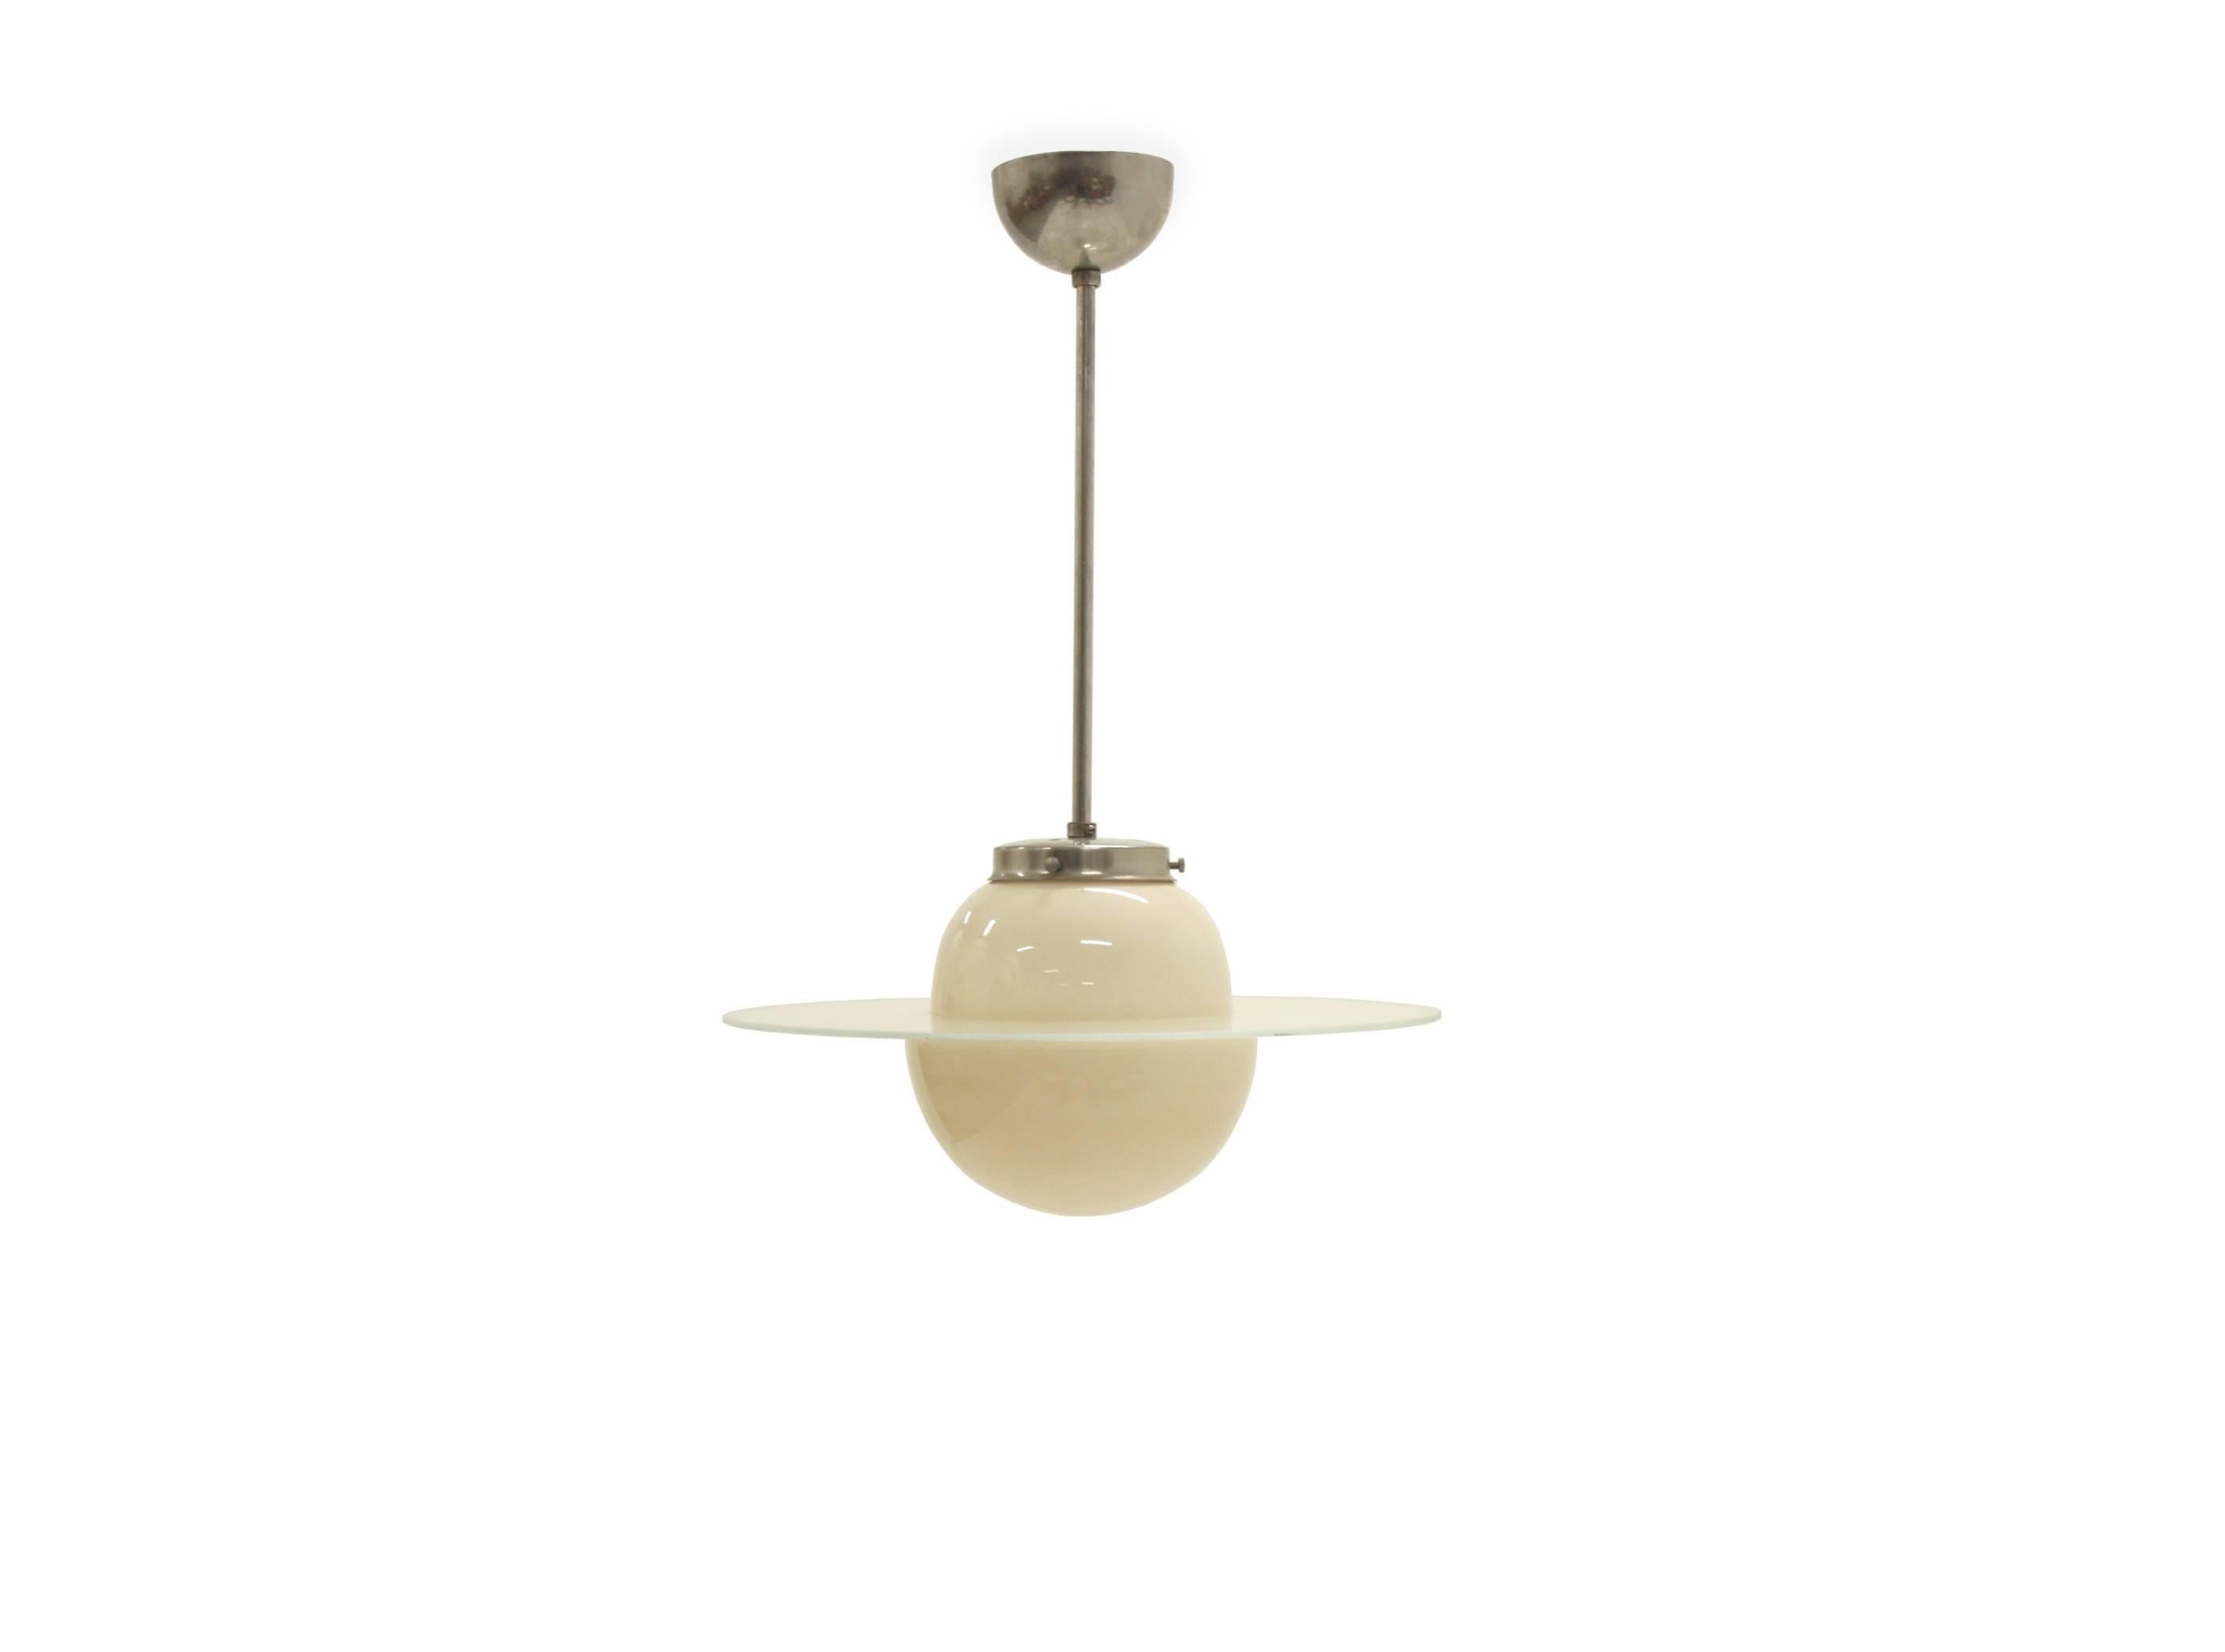 Wonderful and dreamy ceiling lamp on a chrome steel frame and shade in opaline glass with a circular Saturn ring in frosted glass.
 
Most likely designed and made in Sweden, circa 1930s second half.
 
The lamp is fully working and in excellent